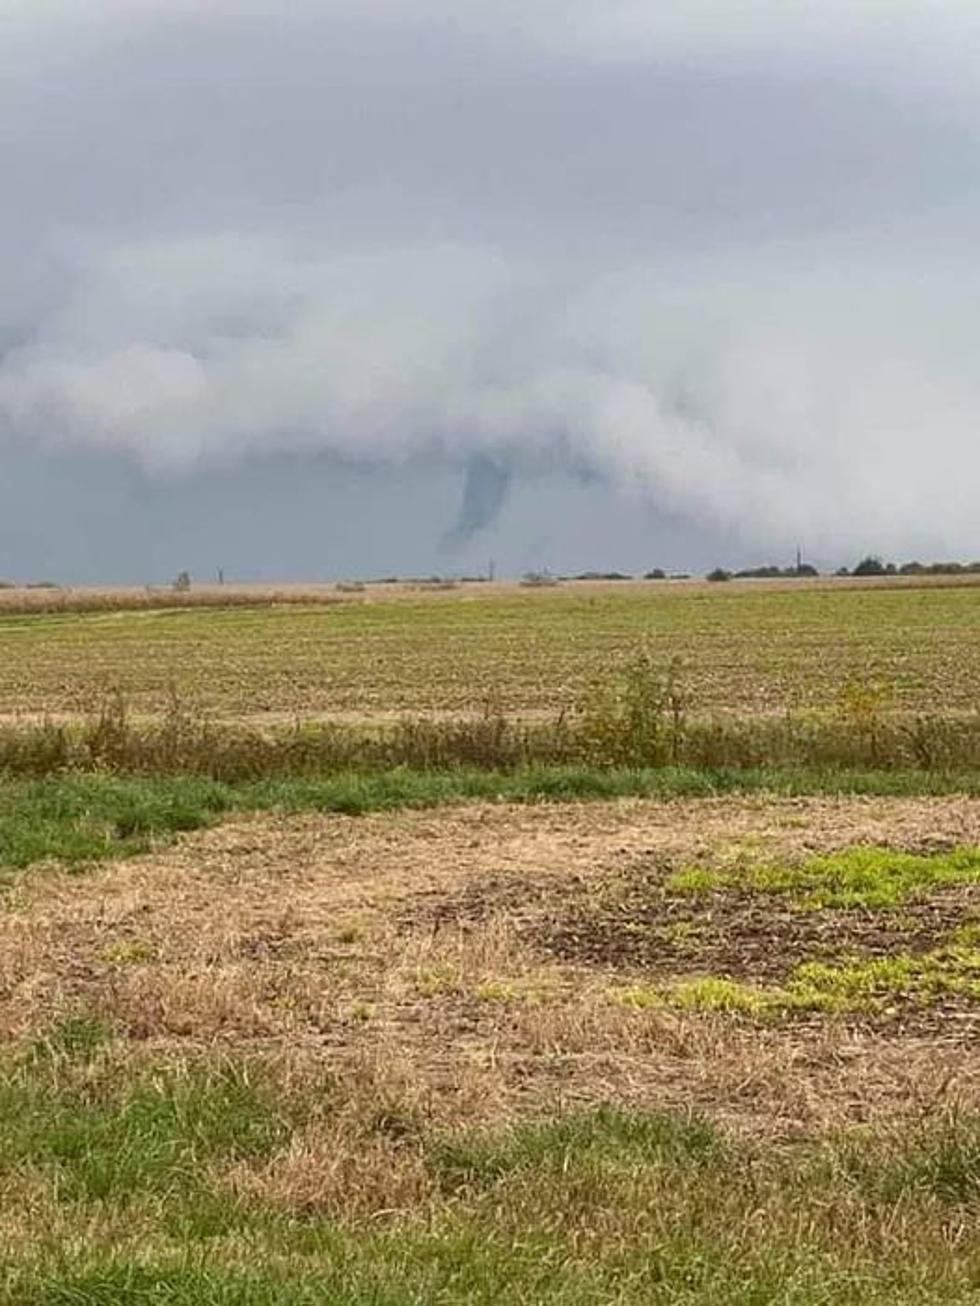 Missouri Experienced Several Tornadoes Sunday